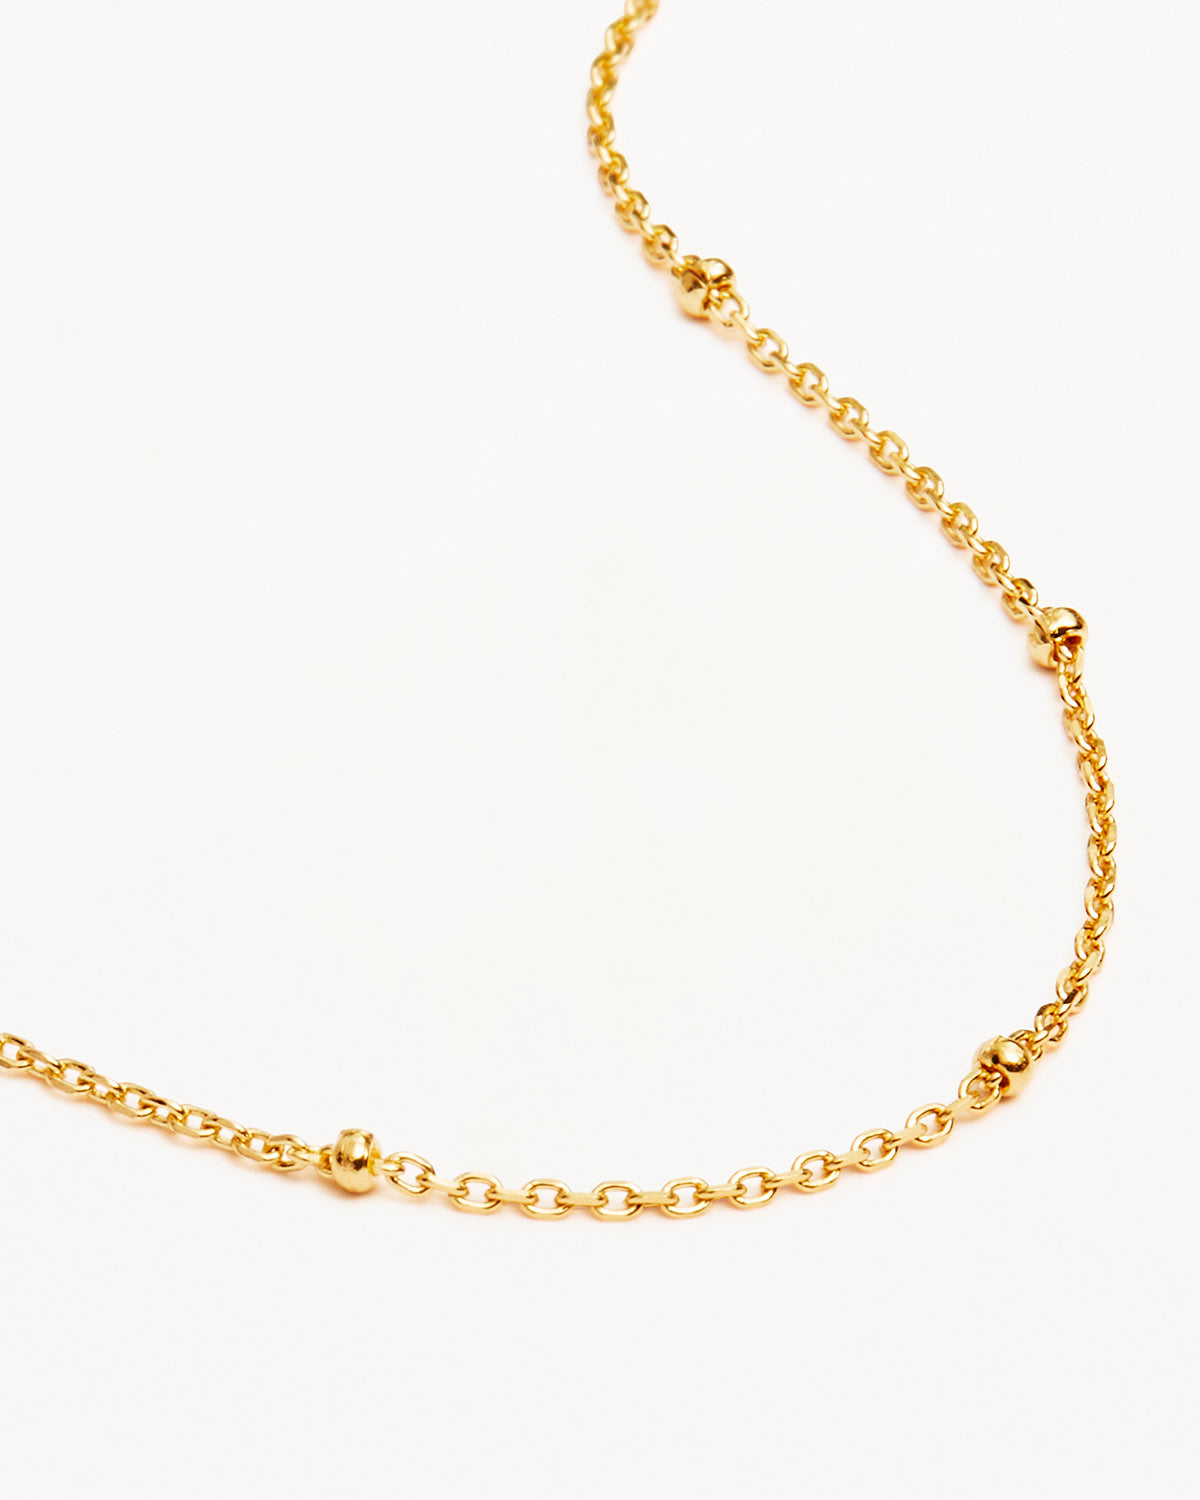 Rose Gold Ball Chain Replacement Necklace | Lauren's Hope